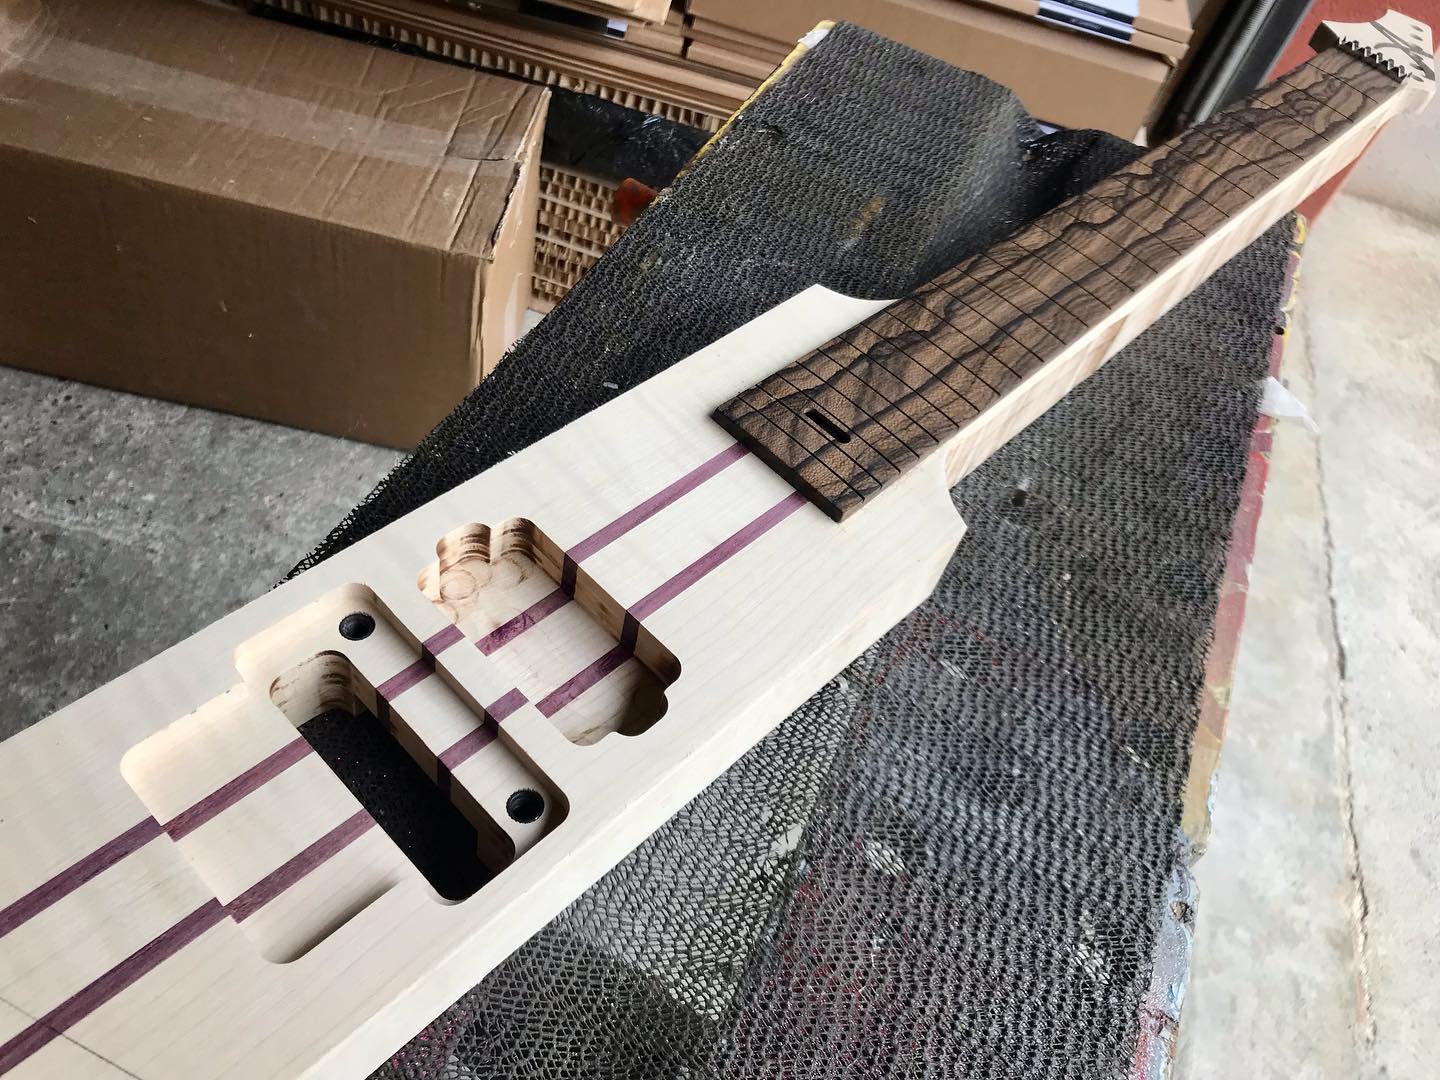 Well, I think it’s fret time!
#guitar #guitare #guitarmaking #guitarmaker #luthier #lutherie #superstrat #neckthrough #maplewood #purpleheartwood #ziricotewood